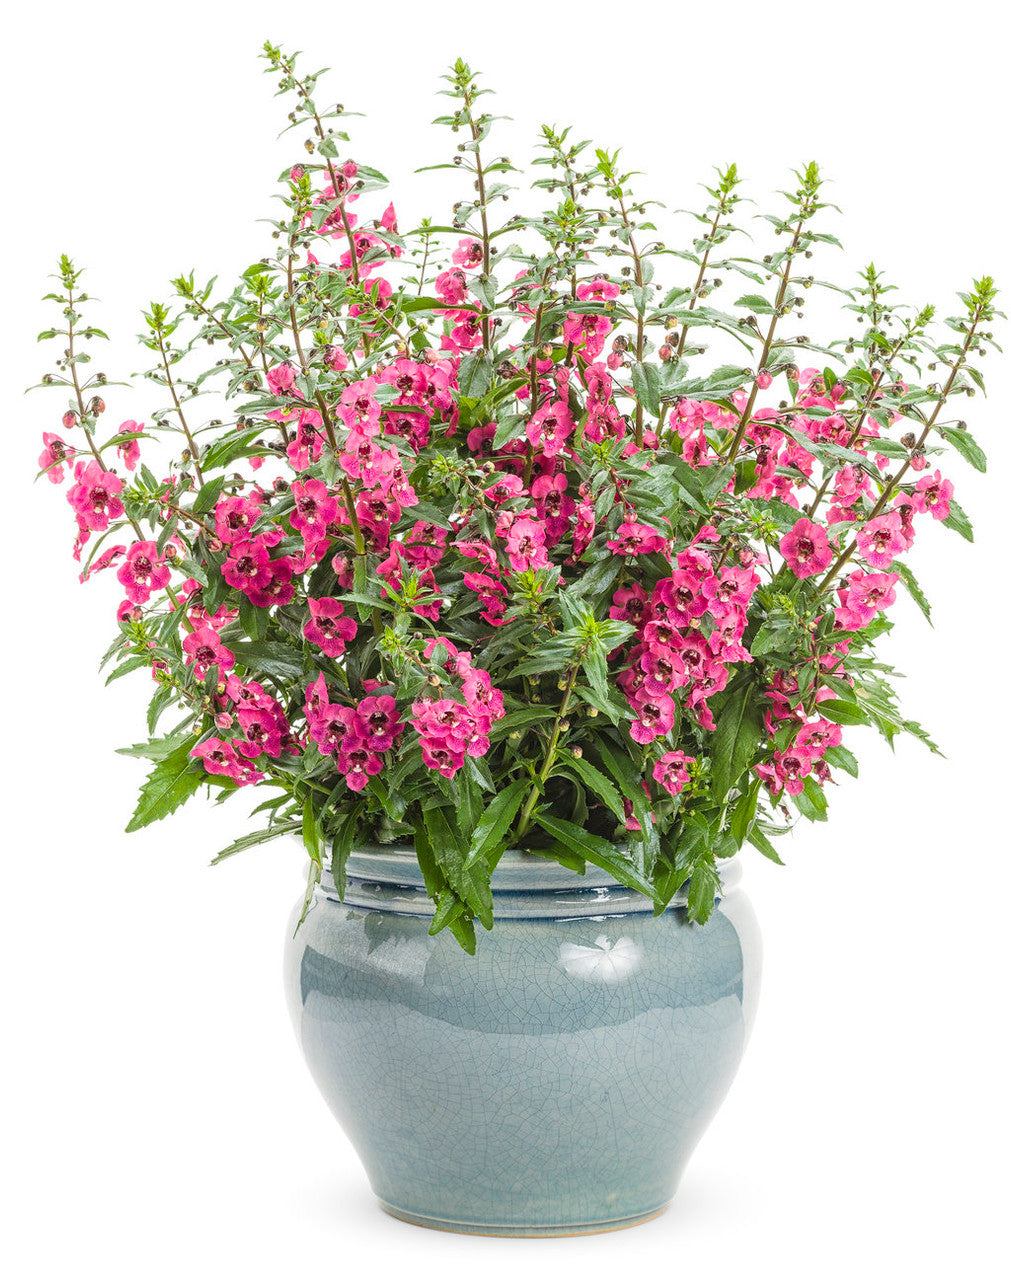 Angelonia angustifolia hybrid 'Angelface® Pefectly Pink' in decorative pot